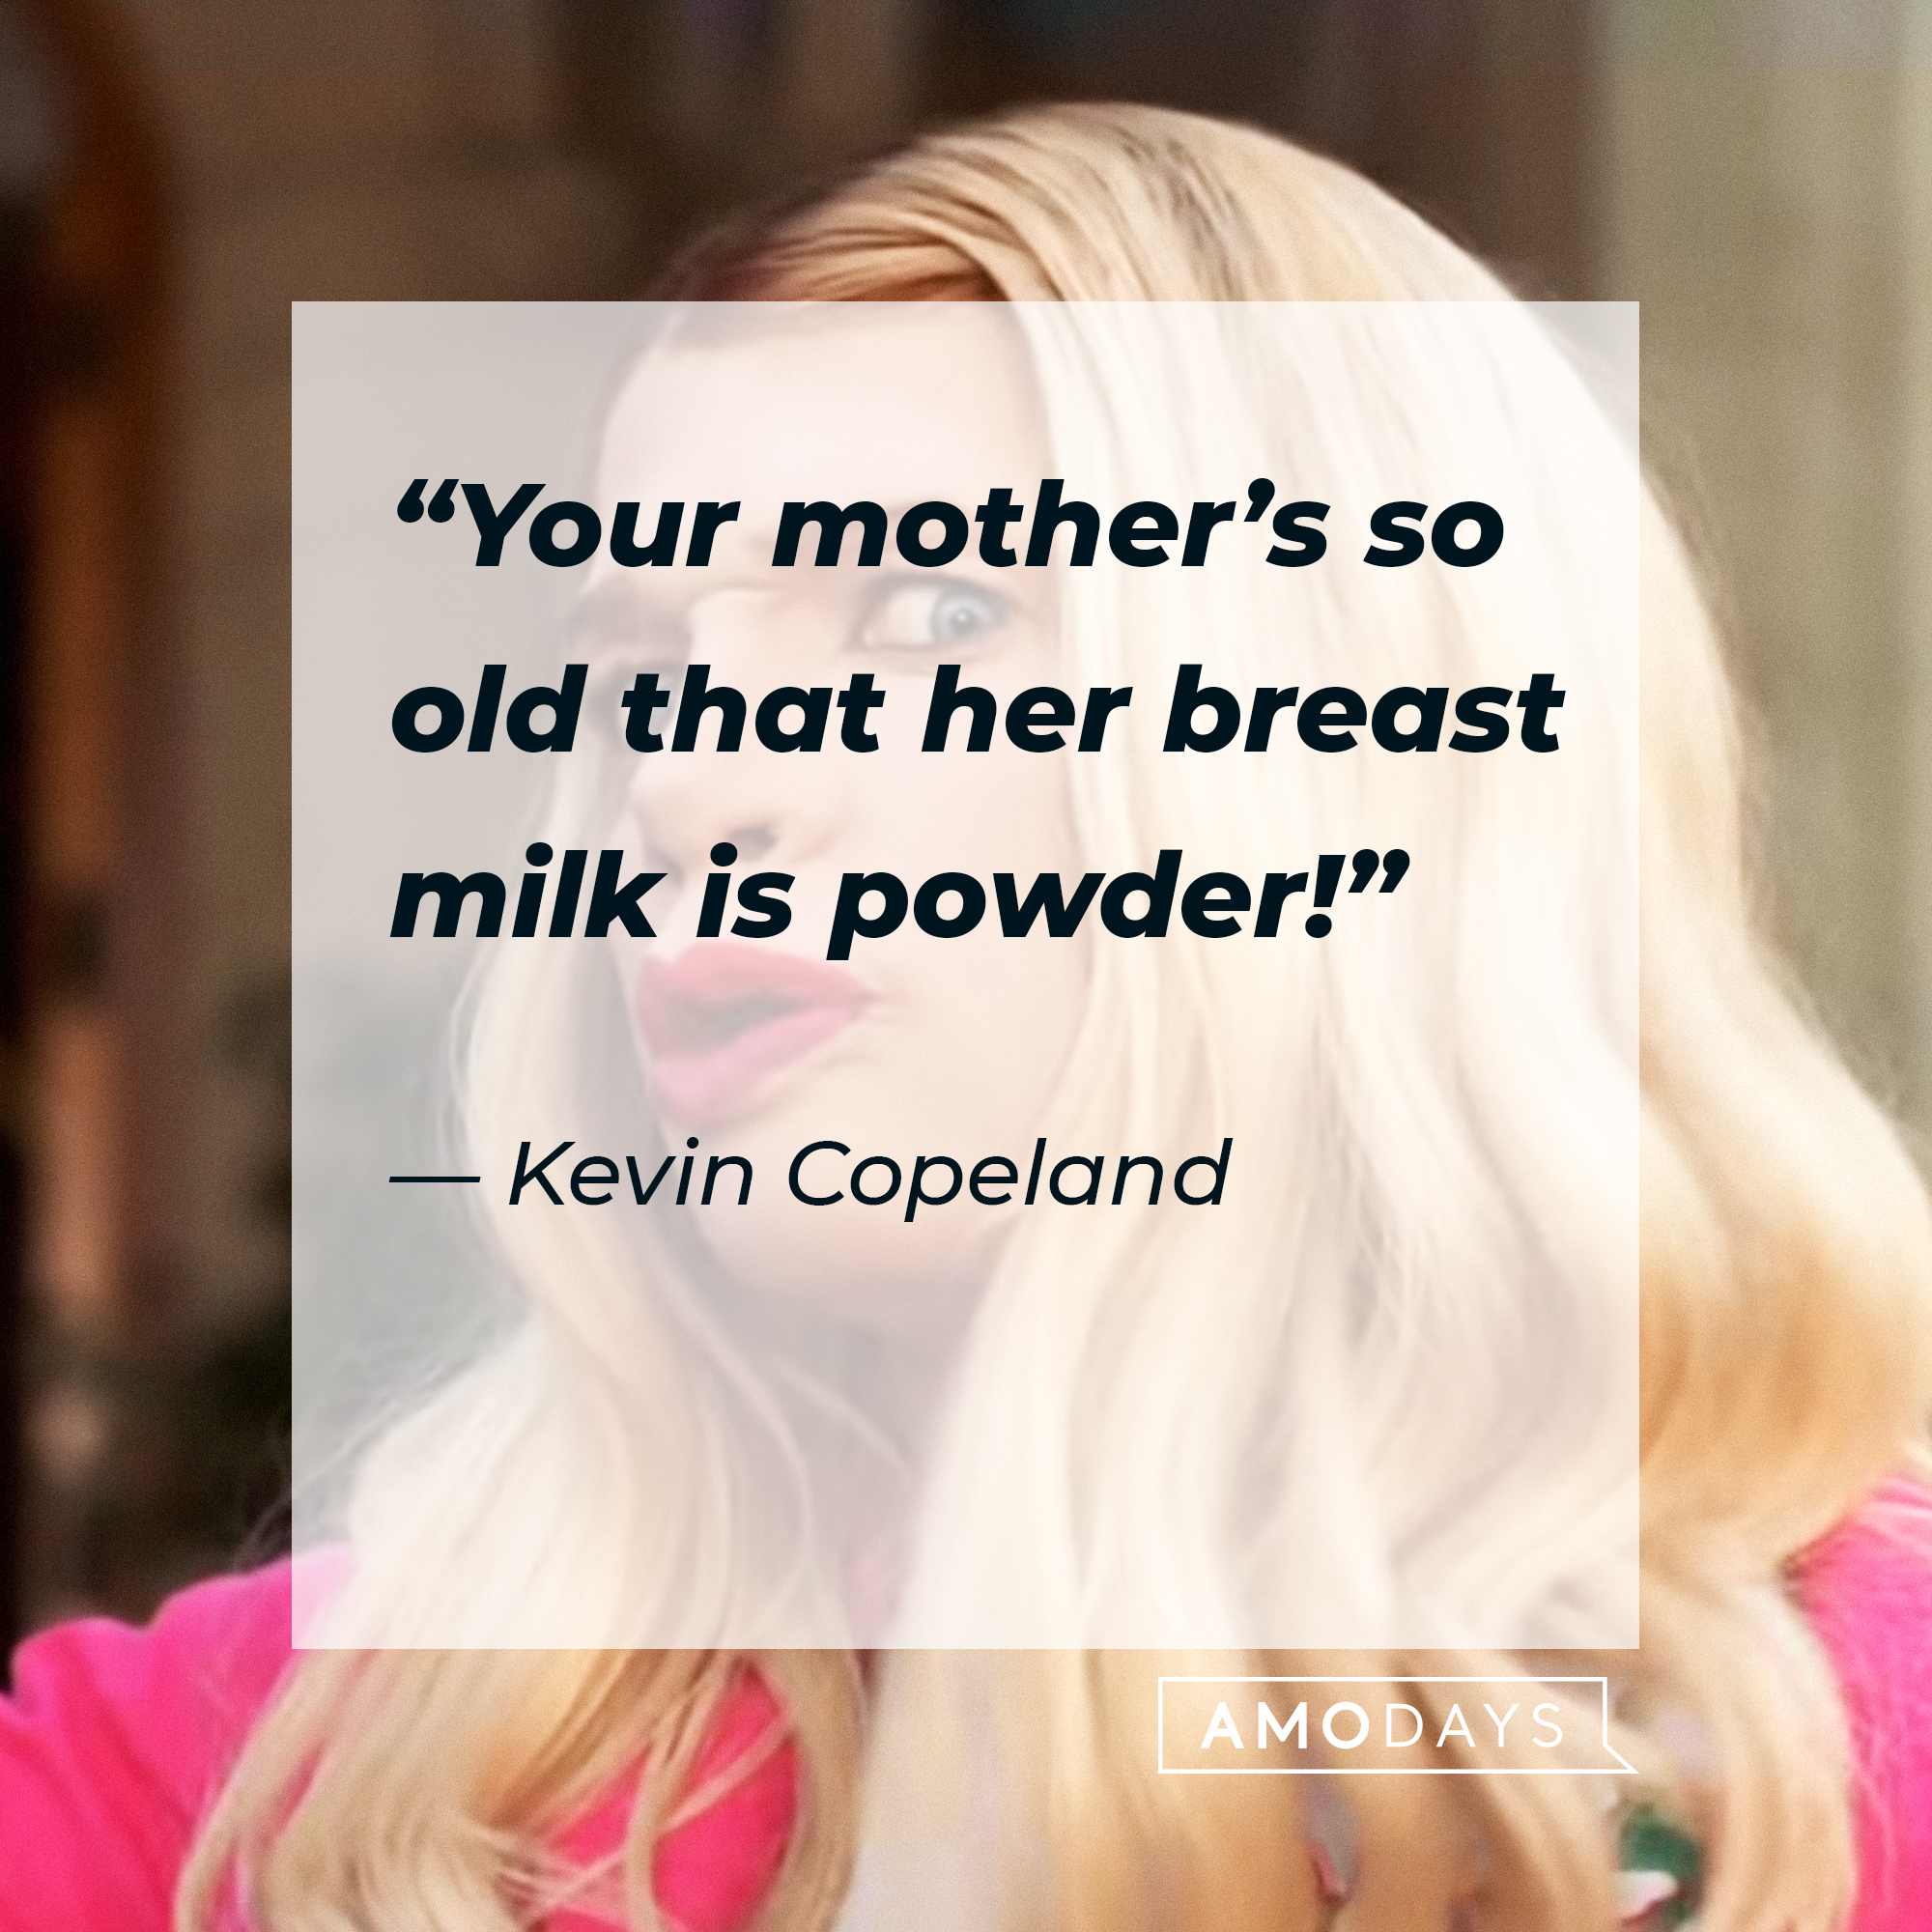 An image of one of the Copeland brothers in disguise with Kevin Copeland’s quote: "Your mother’s so old that her breast milk is powder!”  | Source: Sony Pictures Entertainment